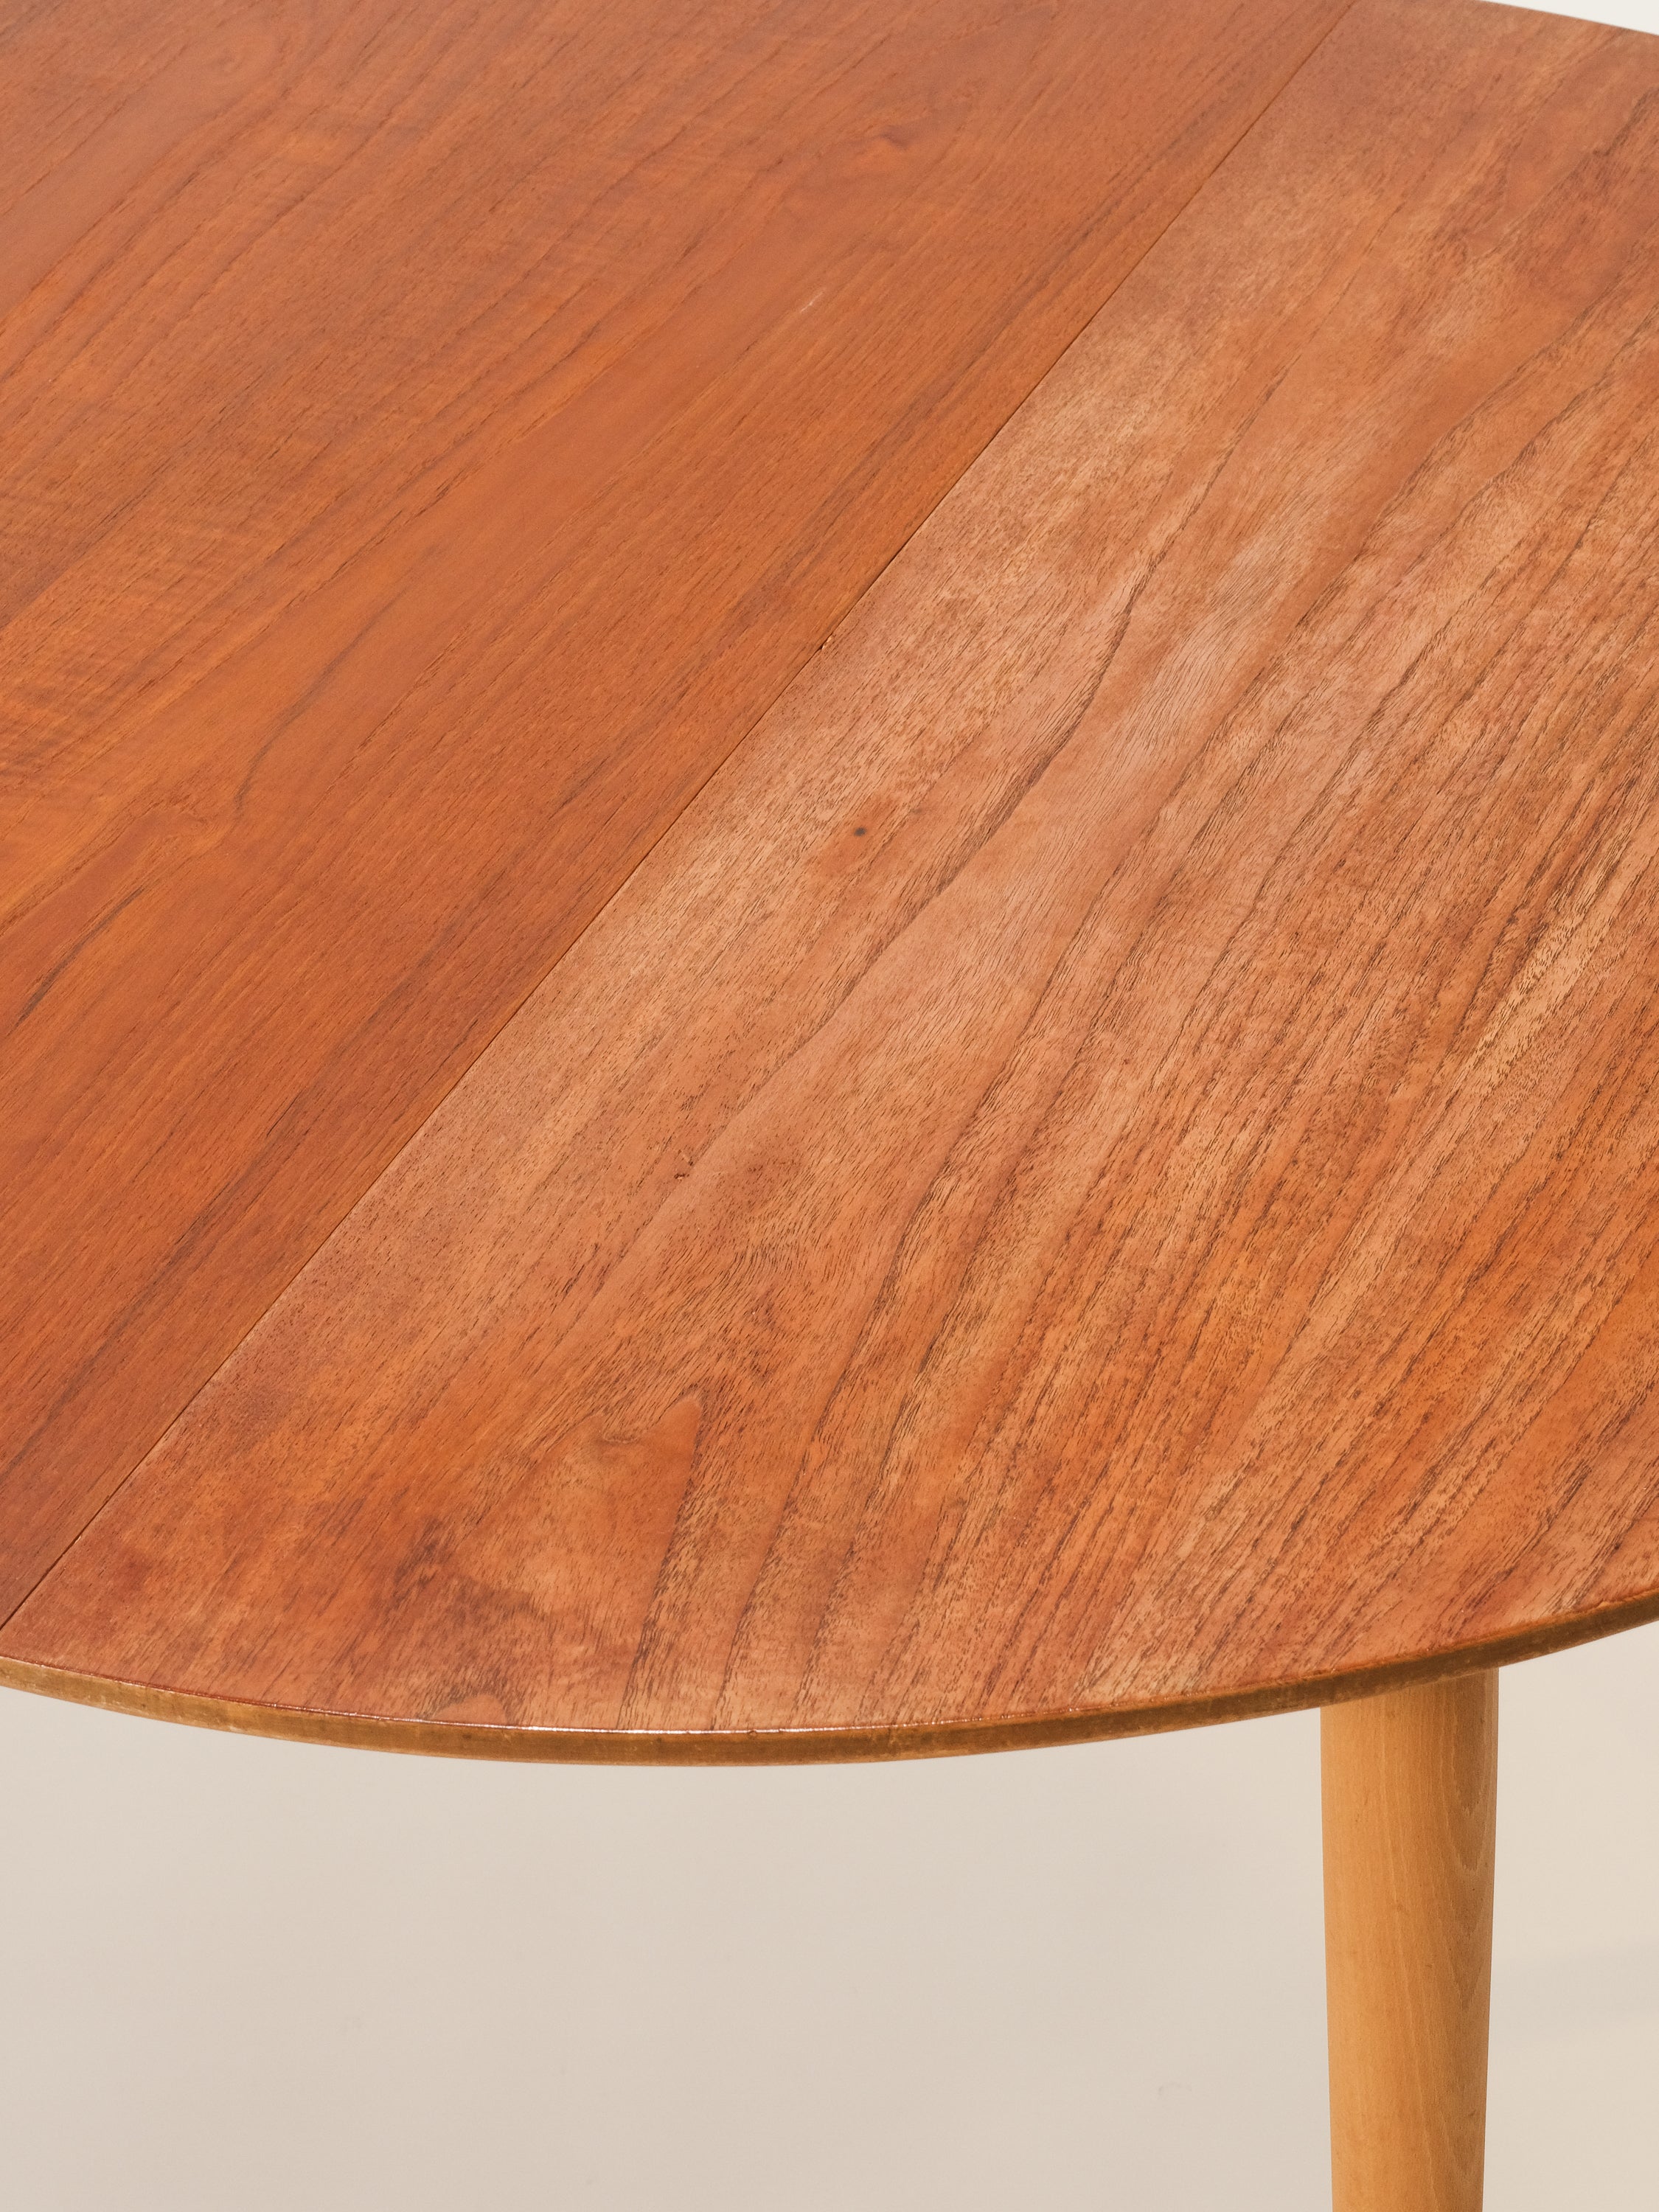 Scandinavian Round Extendable Dining Table, 1960s